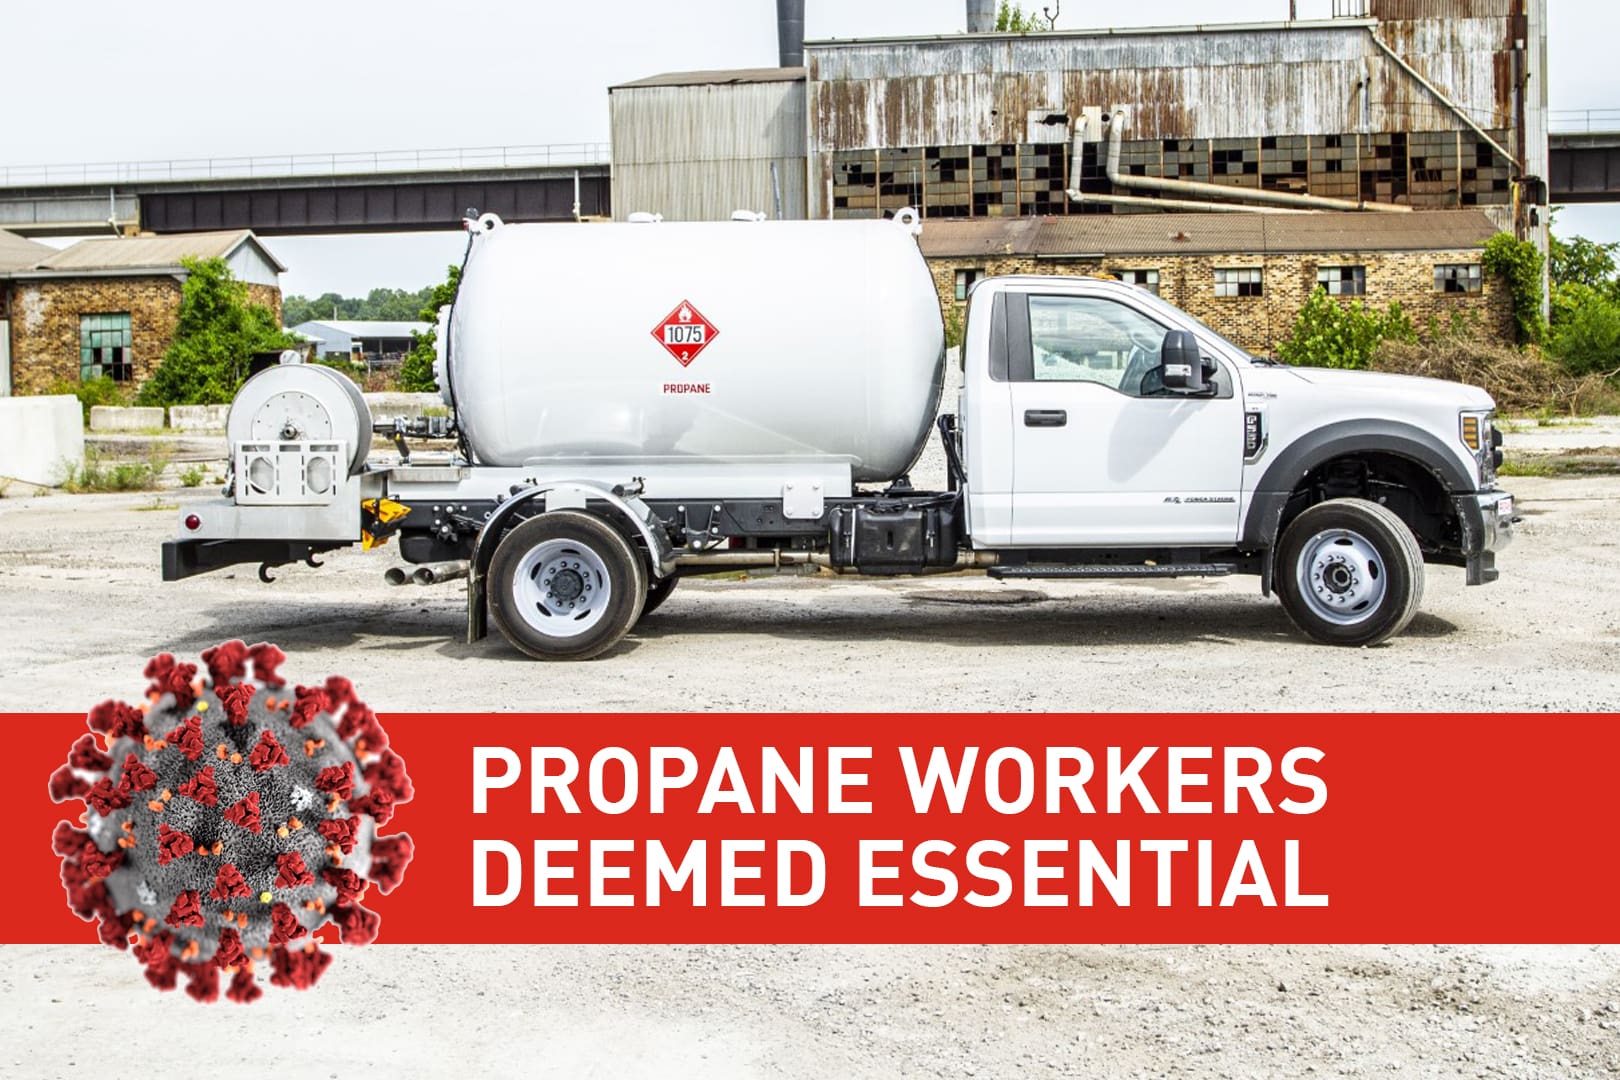 propane workers deemed essential workers banner over image of a propane truck